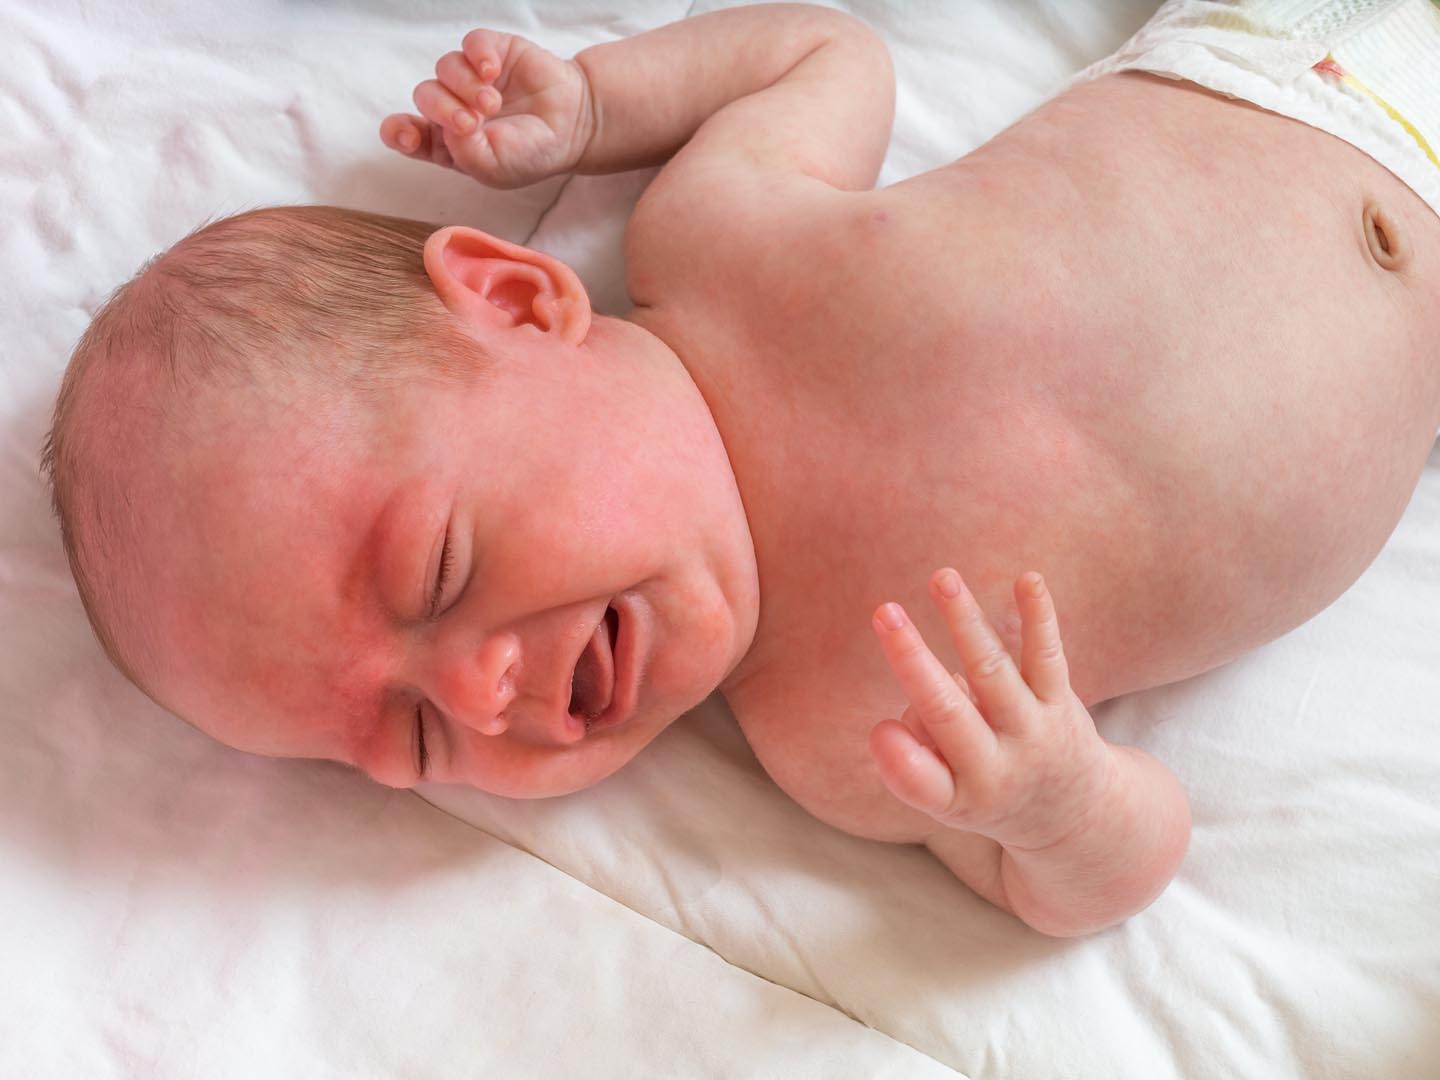 Baby or newborn is crying and suffers from colic